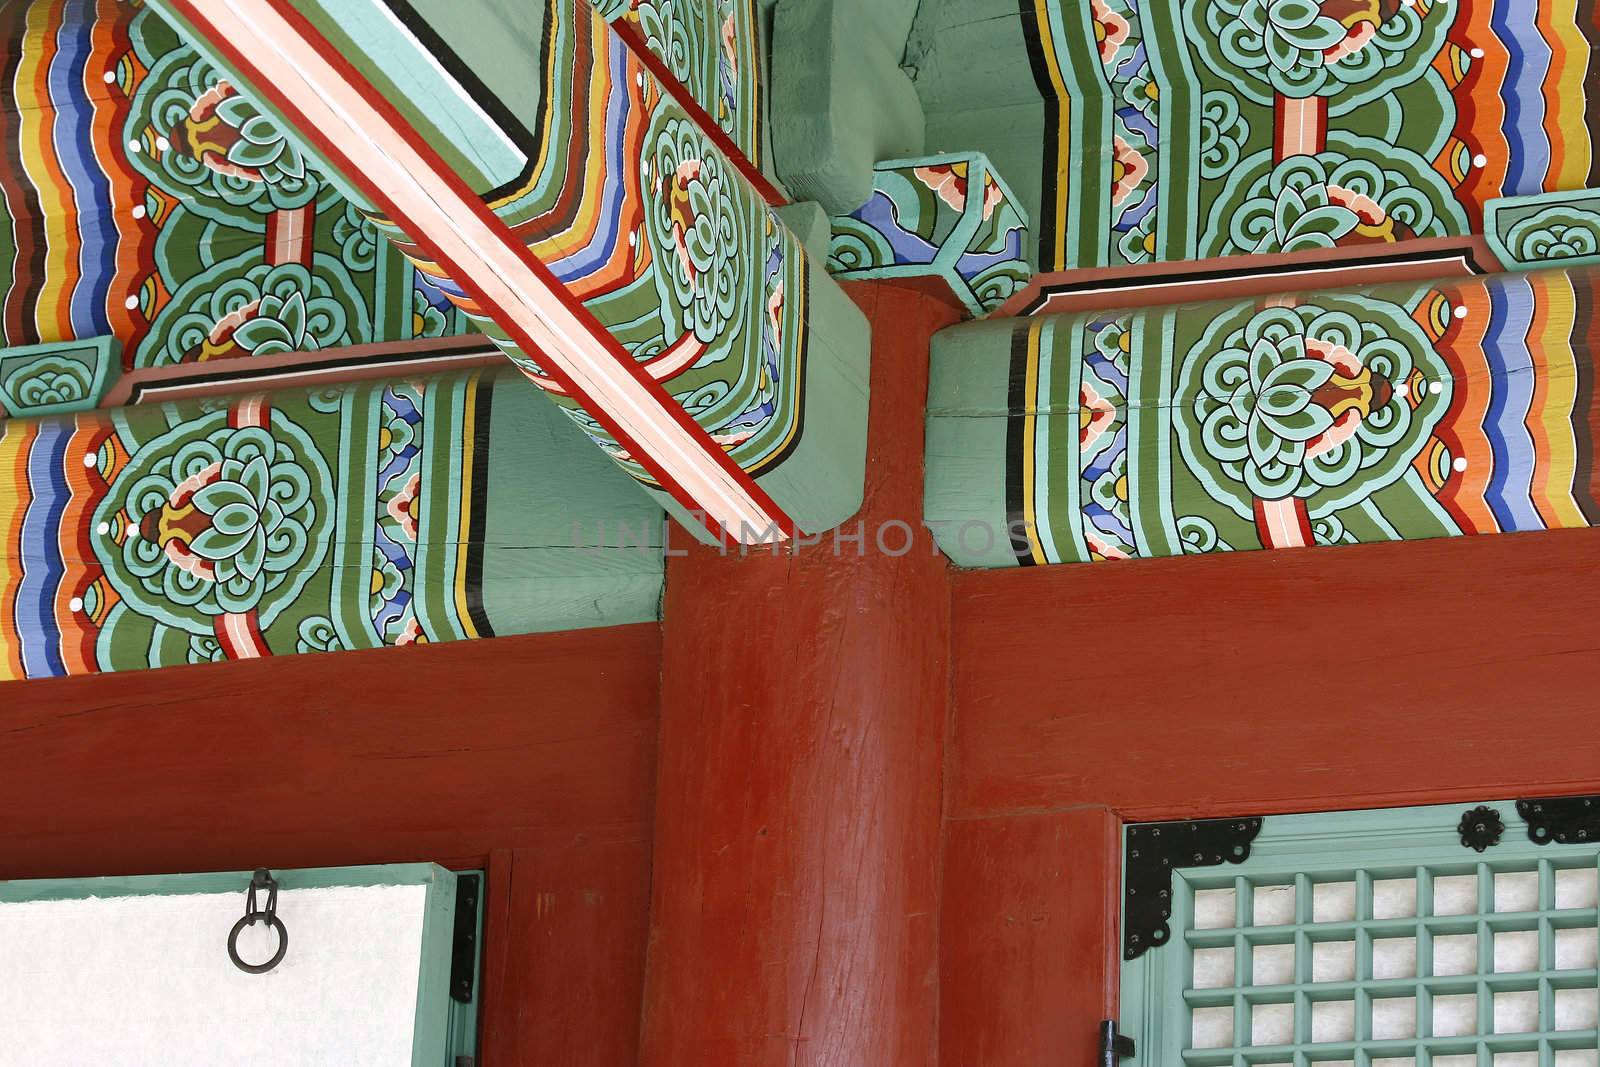 temple ceiling of king seoulleung tomb in seoul korea